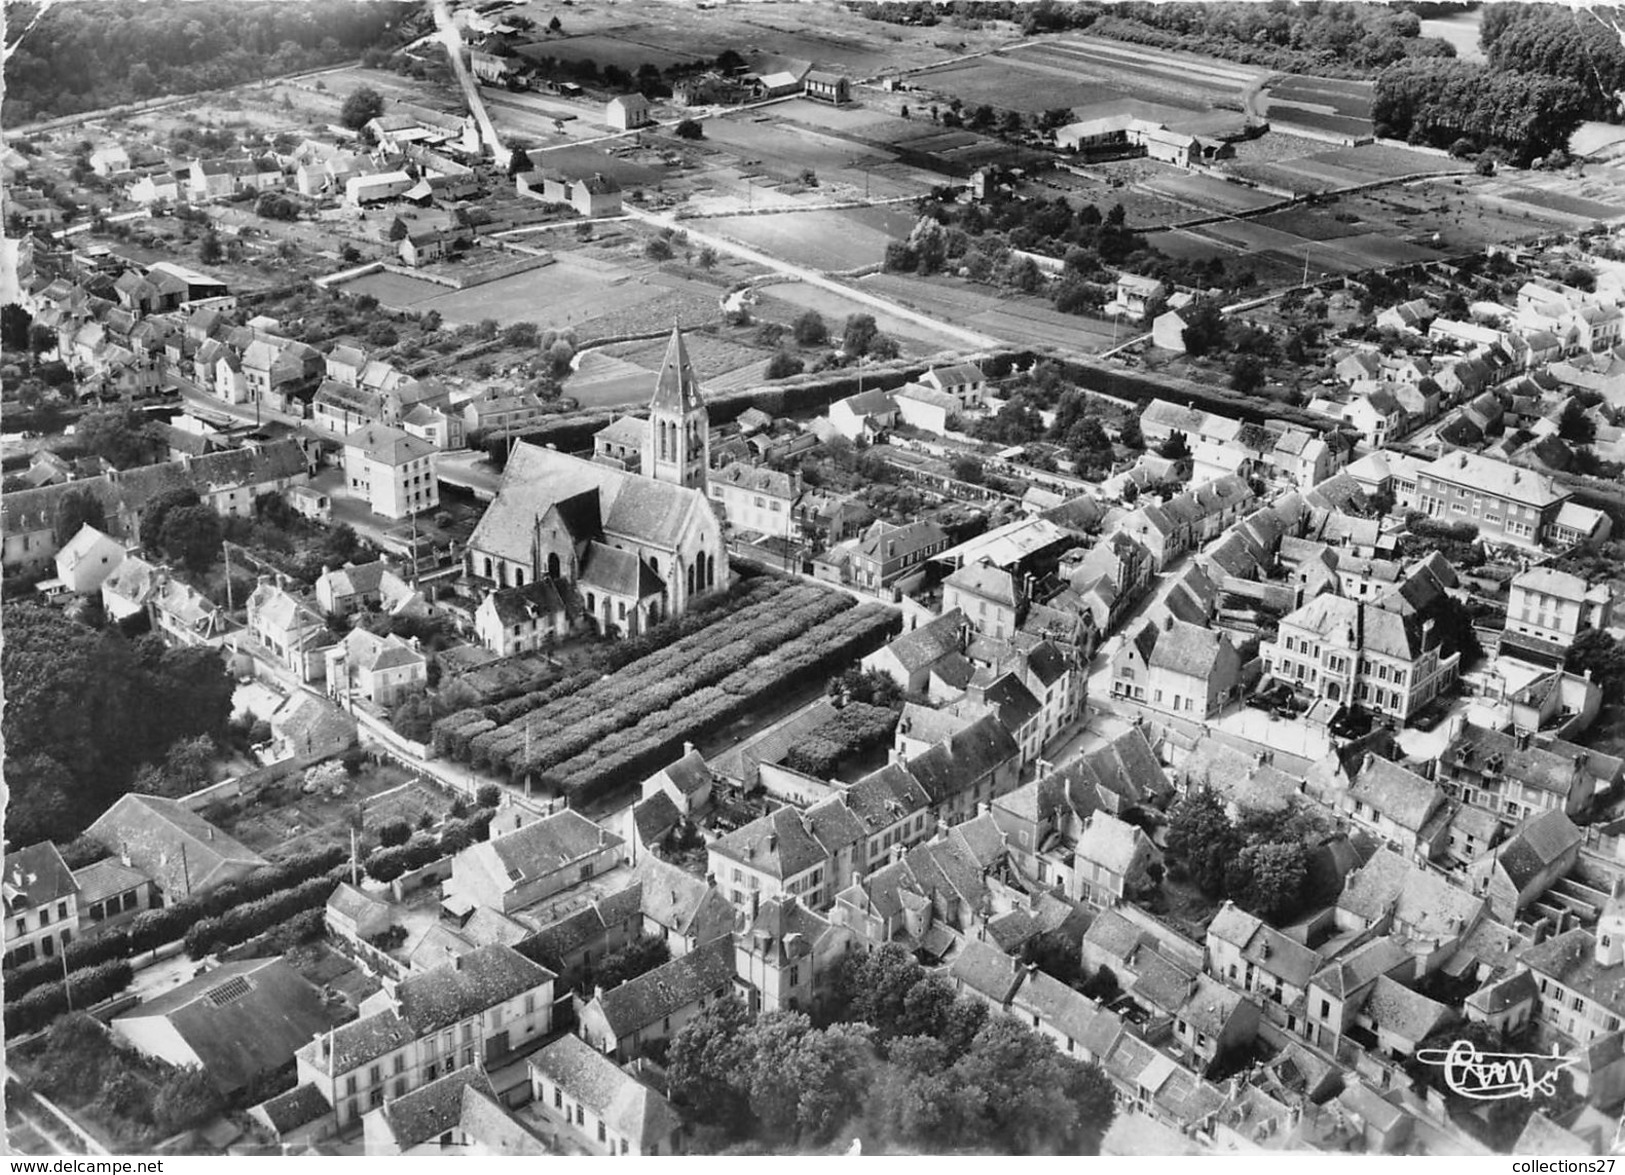 91-MILLY- VUE AERIENNE , L'EGLISE - Milly La Foret